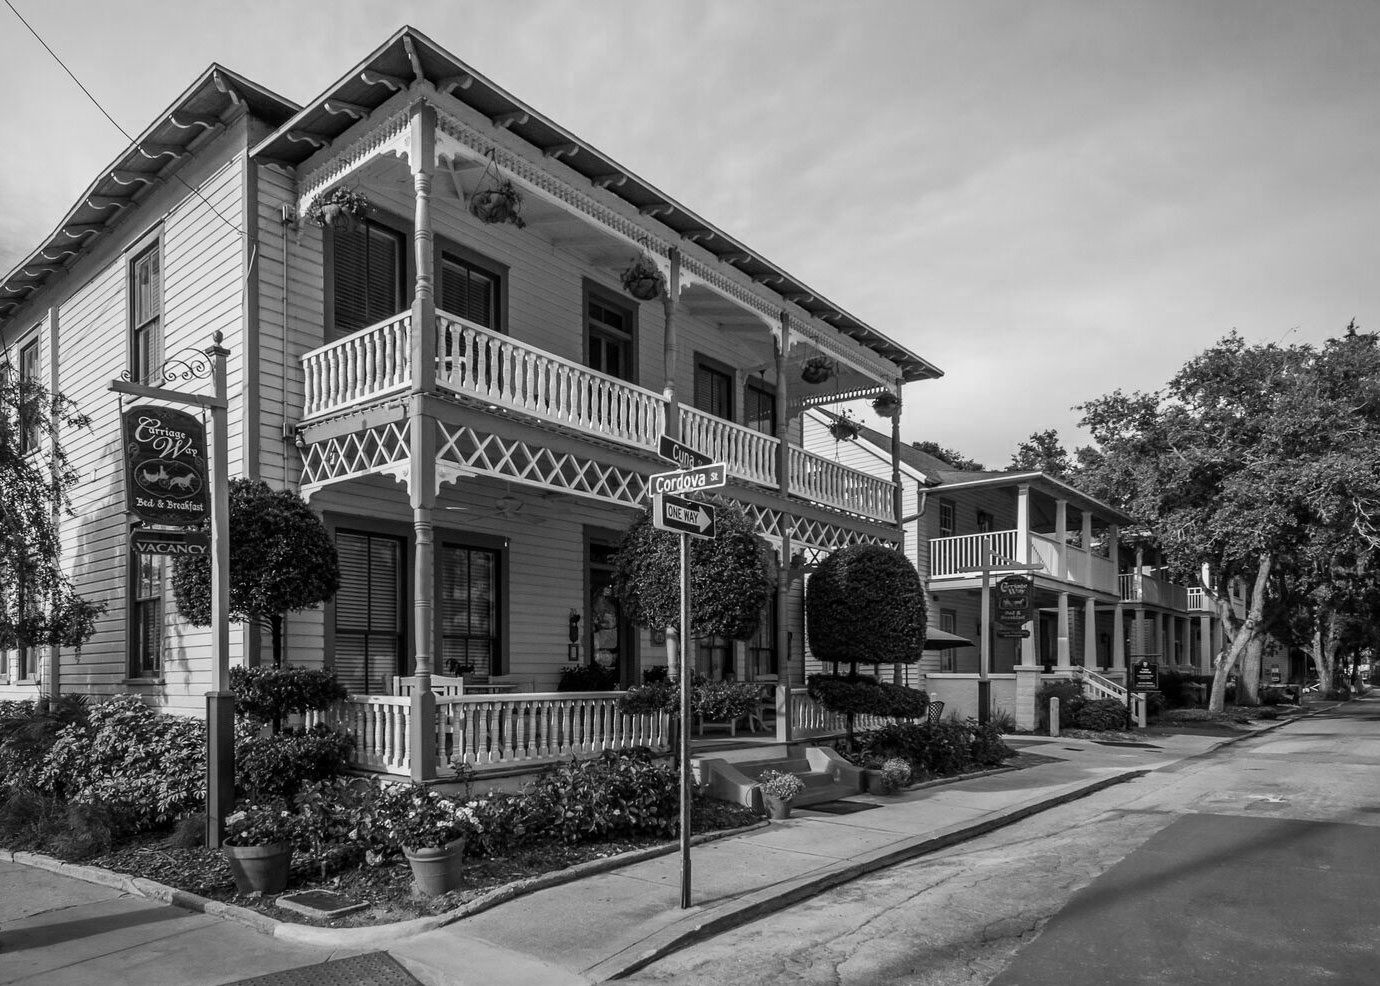 History of the Carriage Way Bed & Breakfast